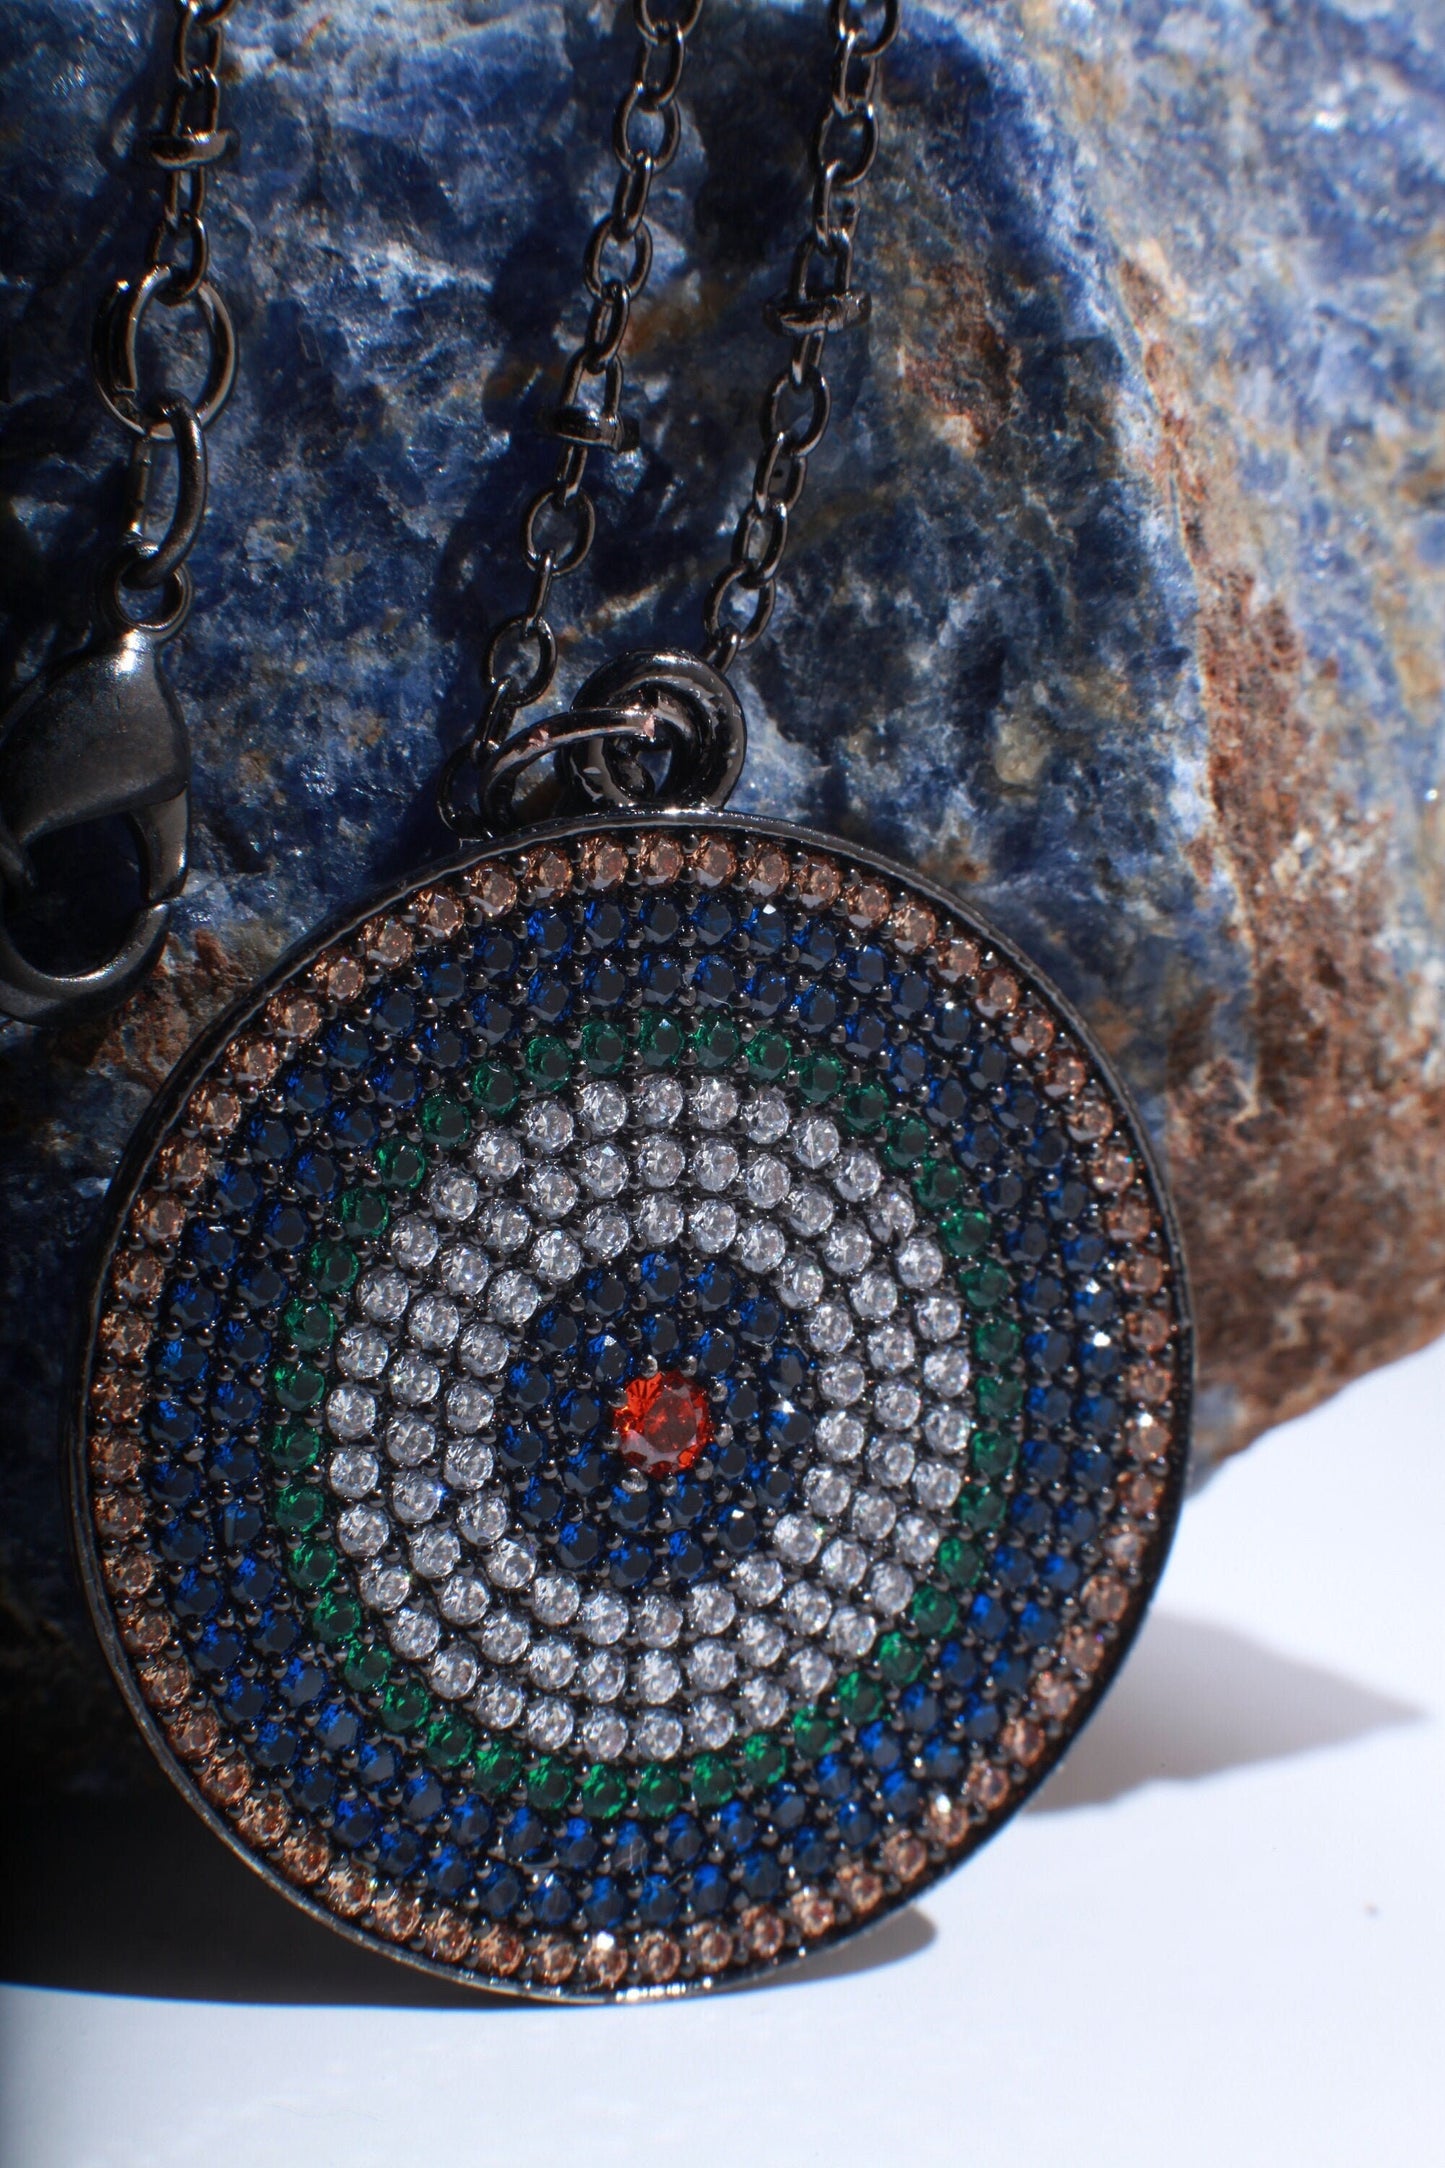 Cubic Zirconia Micro Pave Diamond Style Large Evil Eye Pendant with Silver Oxidized Necklace, Available in 16&quot;,18&quot;,20&quot;, 22&quot; and 24&quot;